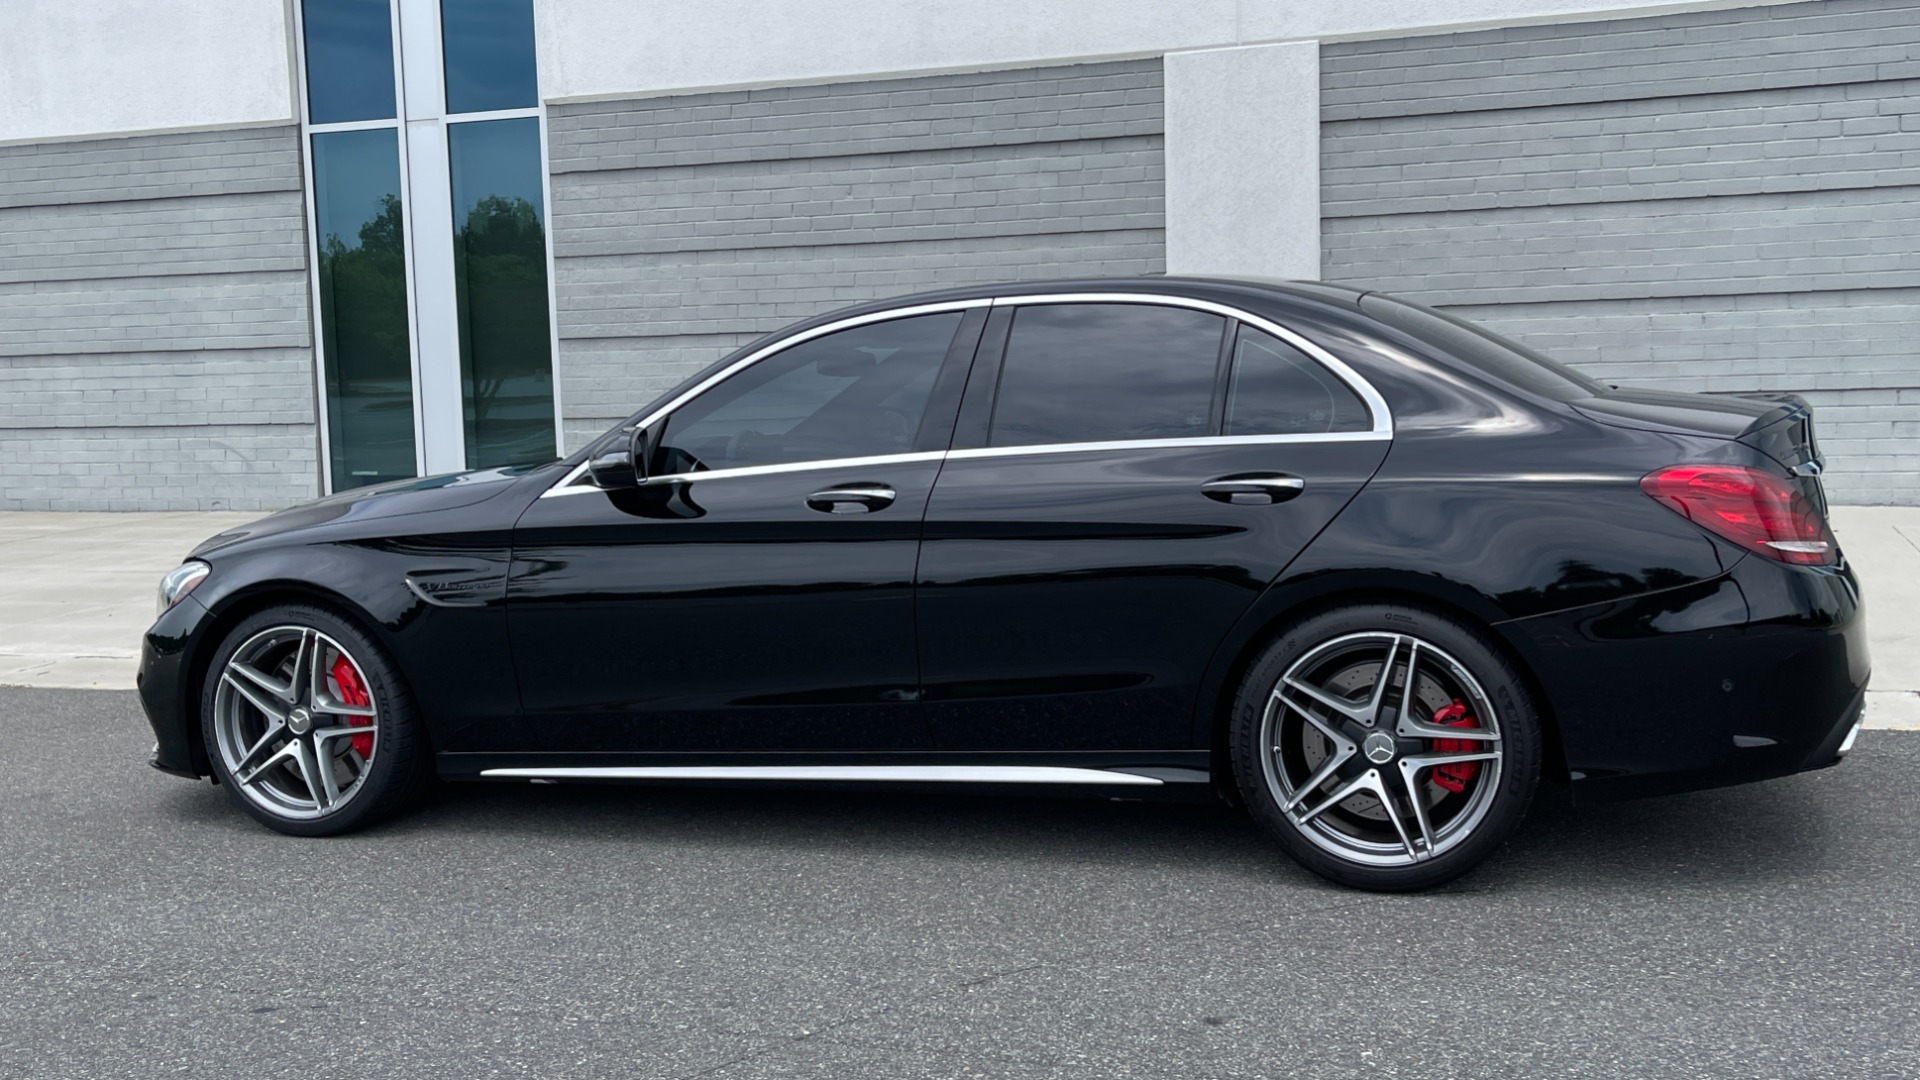 Used 2016 Mercedes-Benz C-CLASS AMG C 63 S SEDAN / NAV / BURMESTER / PANO-ROOF / CAMERA for sale $69,900 at Formula Imports in Charlotte NC 28227 3